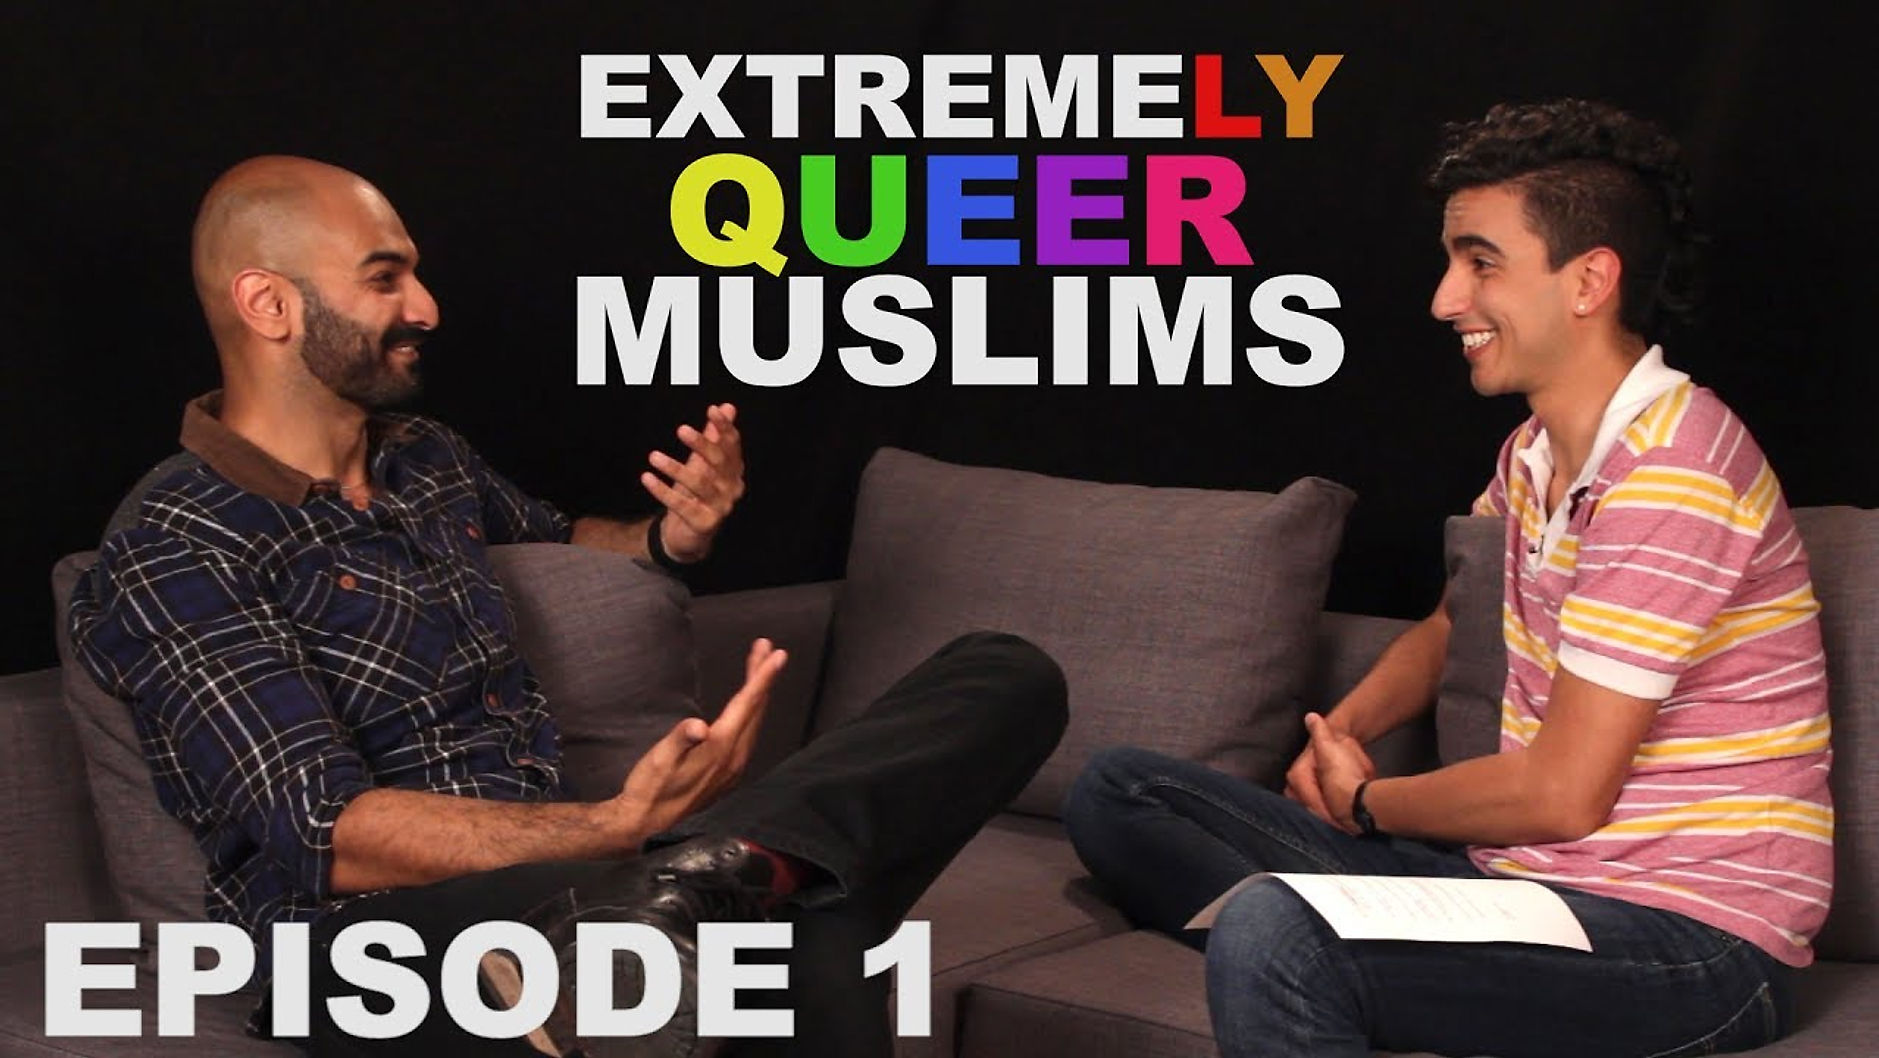 EXTREME(LY QUEER) MUSLIMS